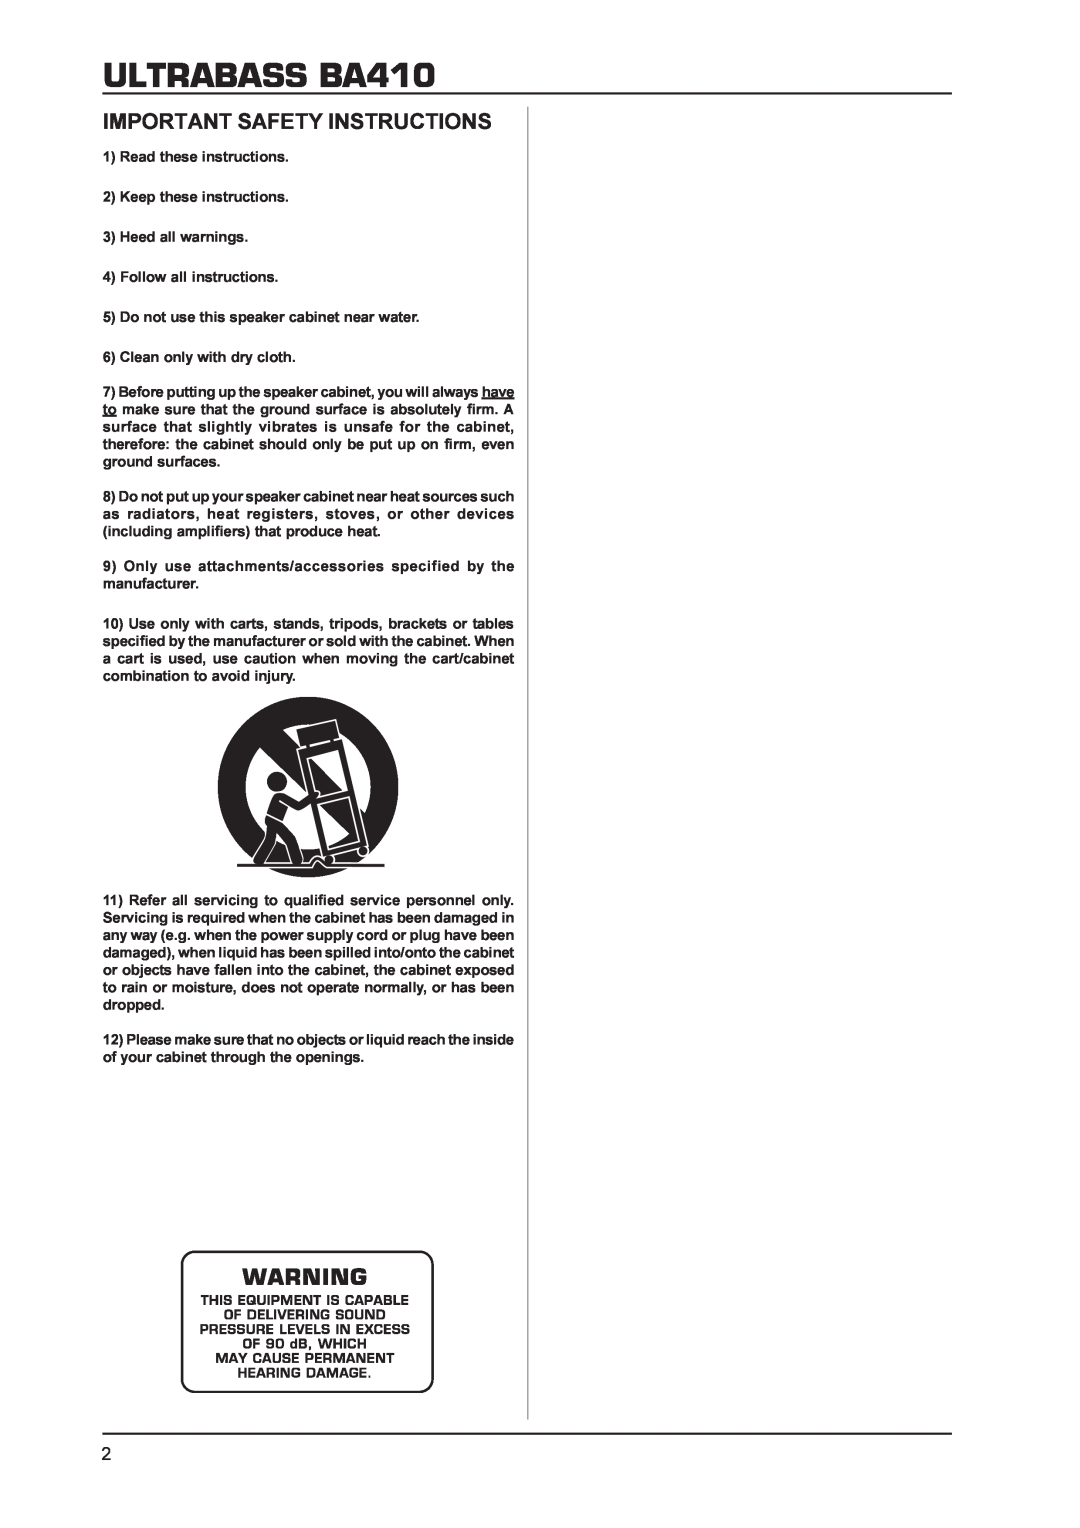 Behringer manual ULTRABASS BA410, Important Safety Instructions 